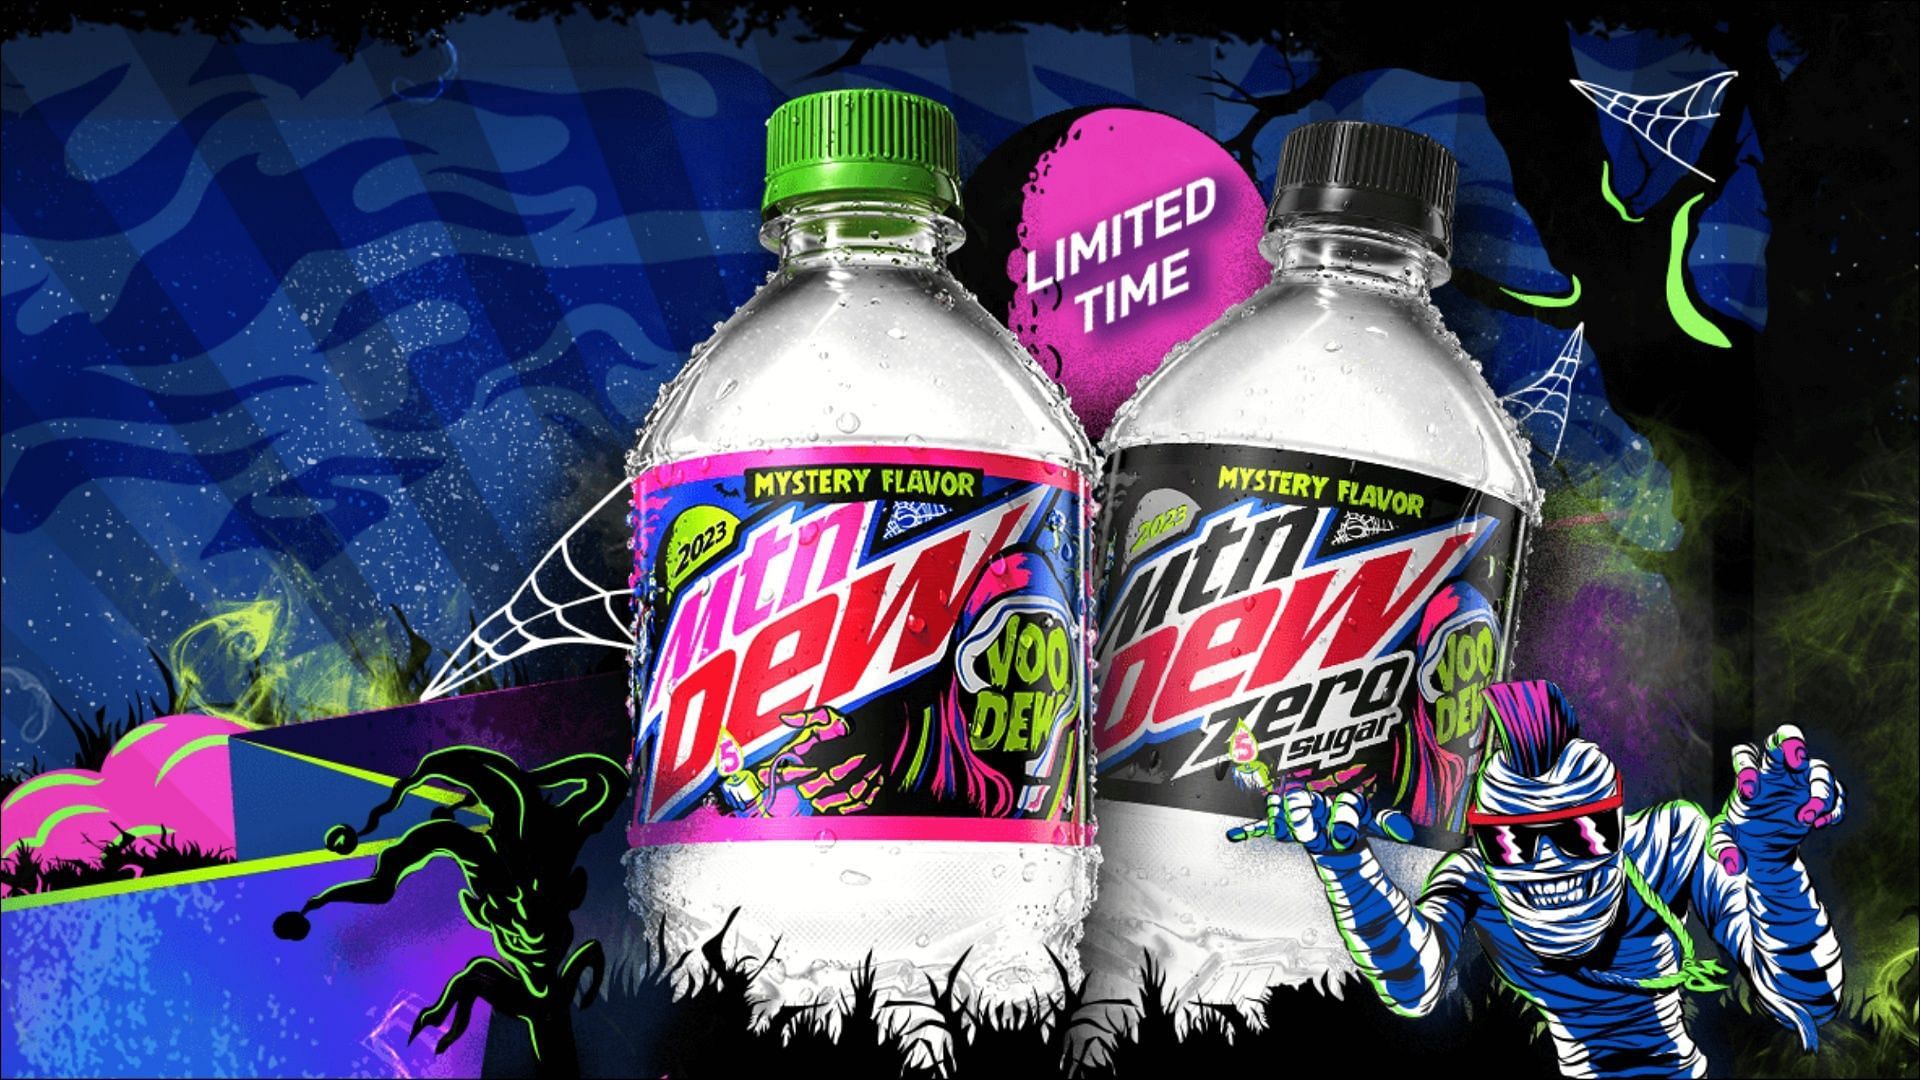 Mountain Dew is introduces a new Halloween themed VOO-DEW drink (Image via Mountain Dew)